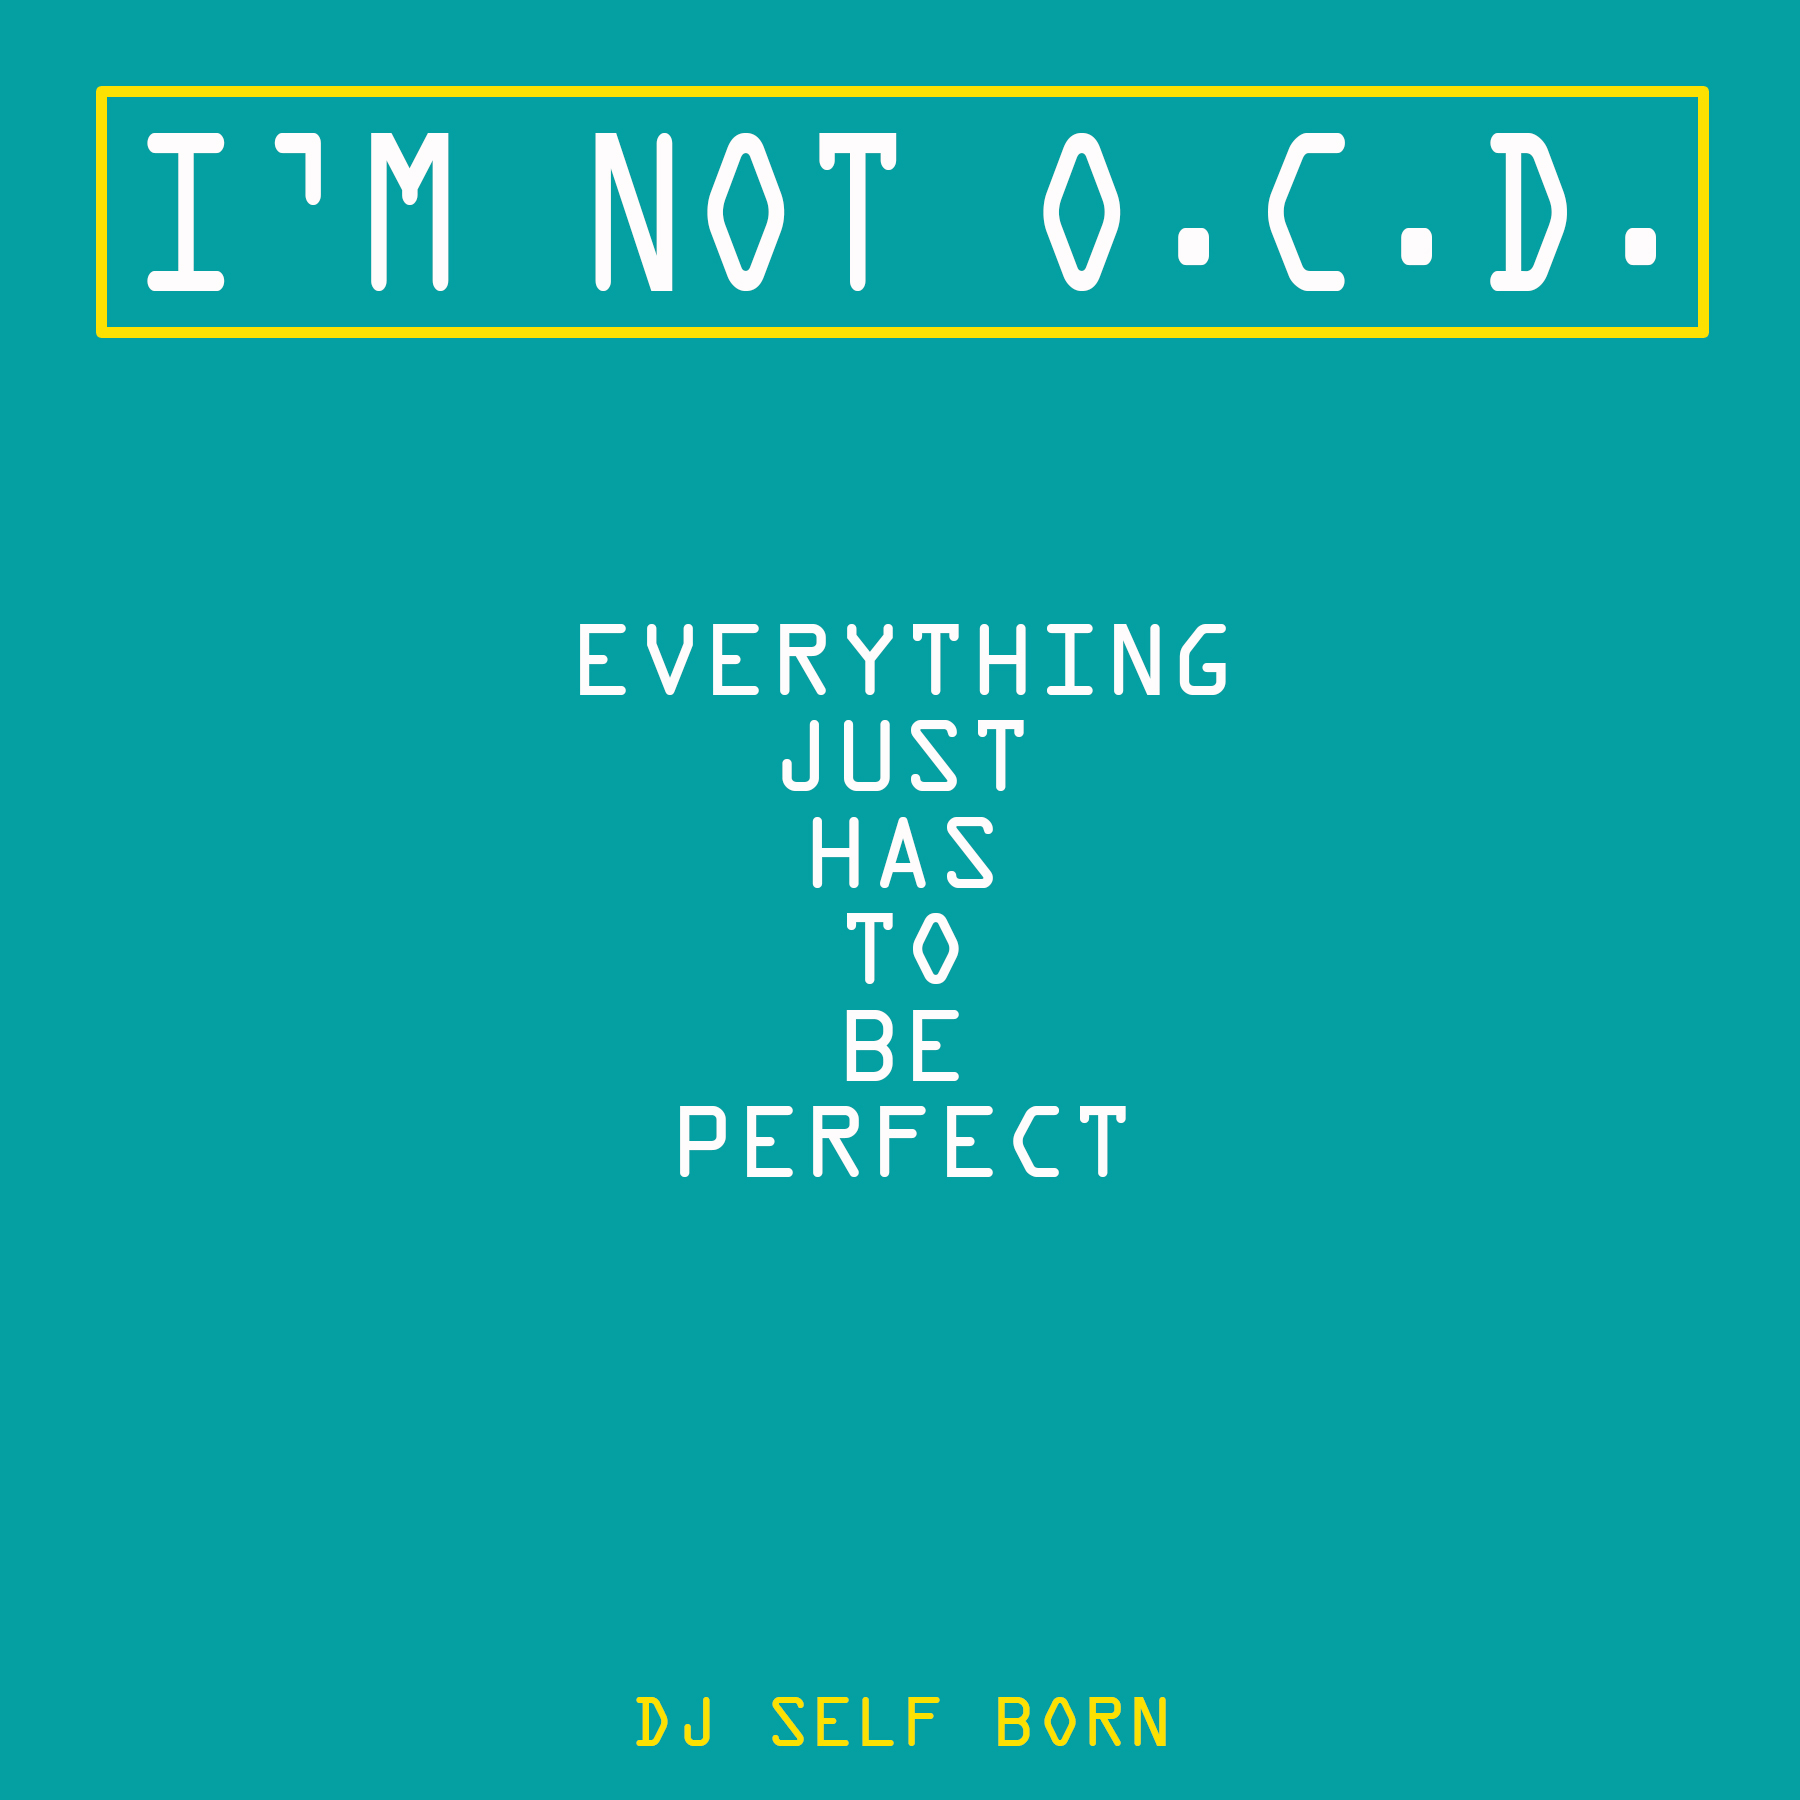 Kanye West collaborator ‘DJ Self Born’ has just dropped his fifth project titled “I’m Not O.C.D., Everything Just Has To Be Perfect”.